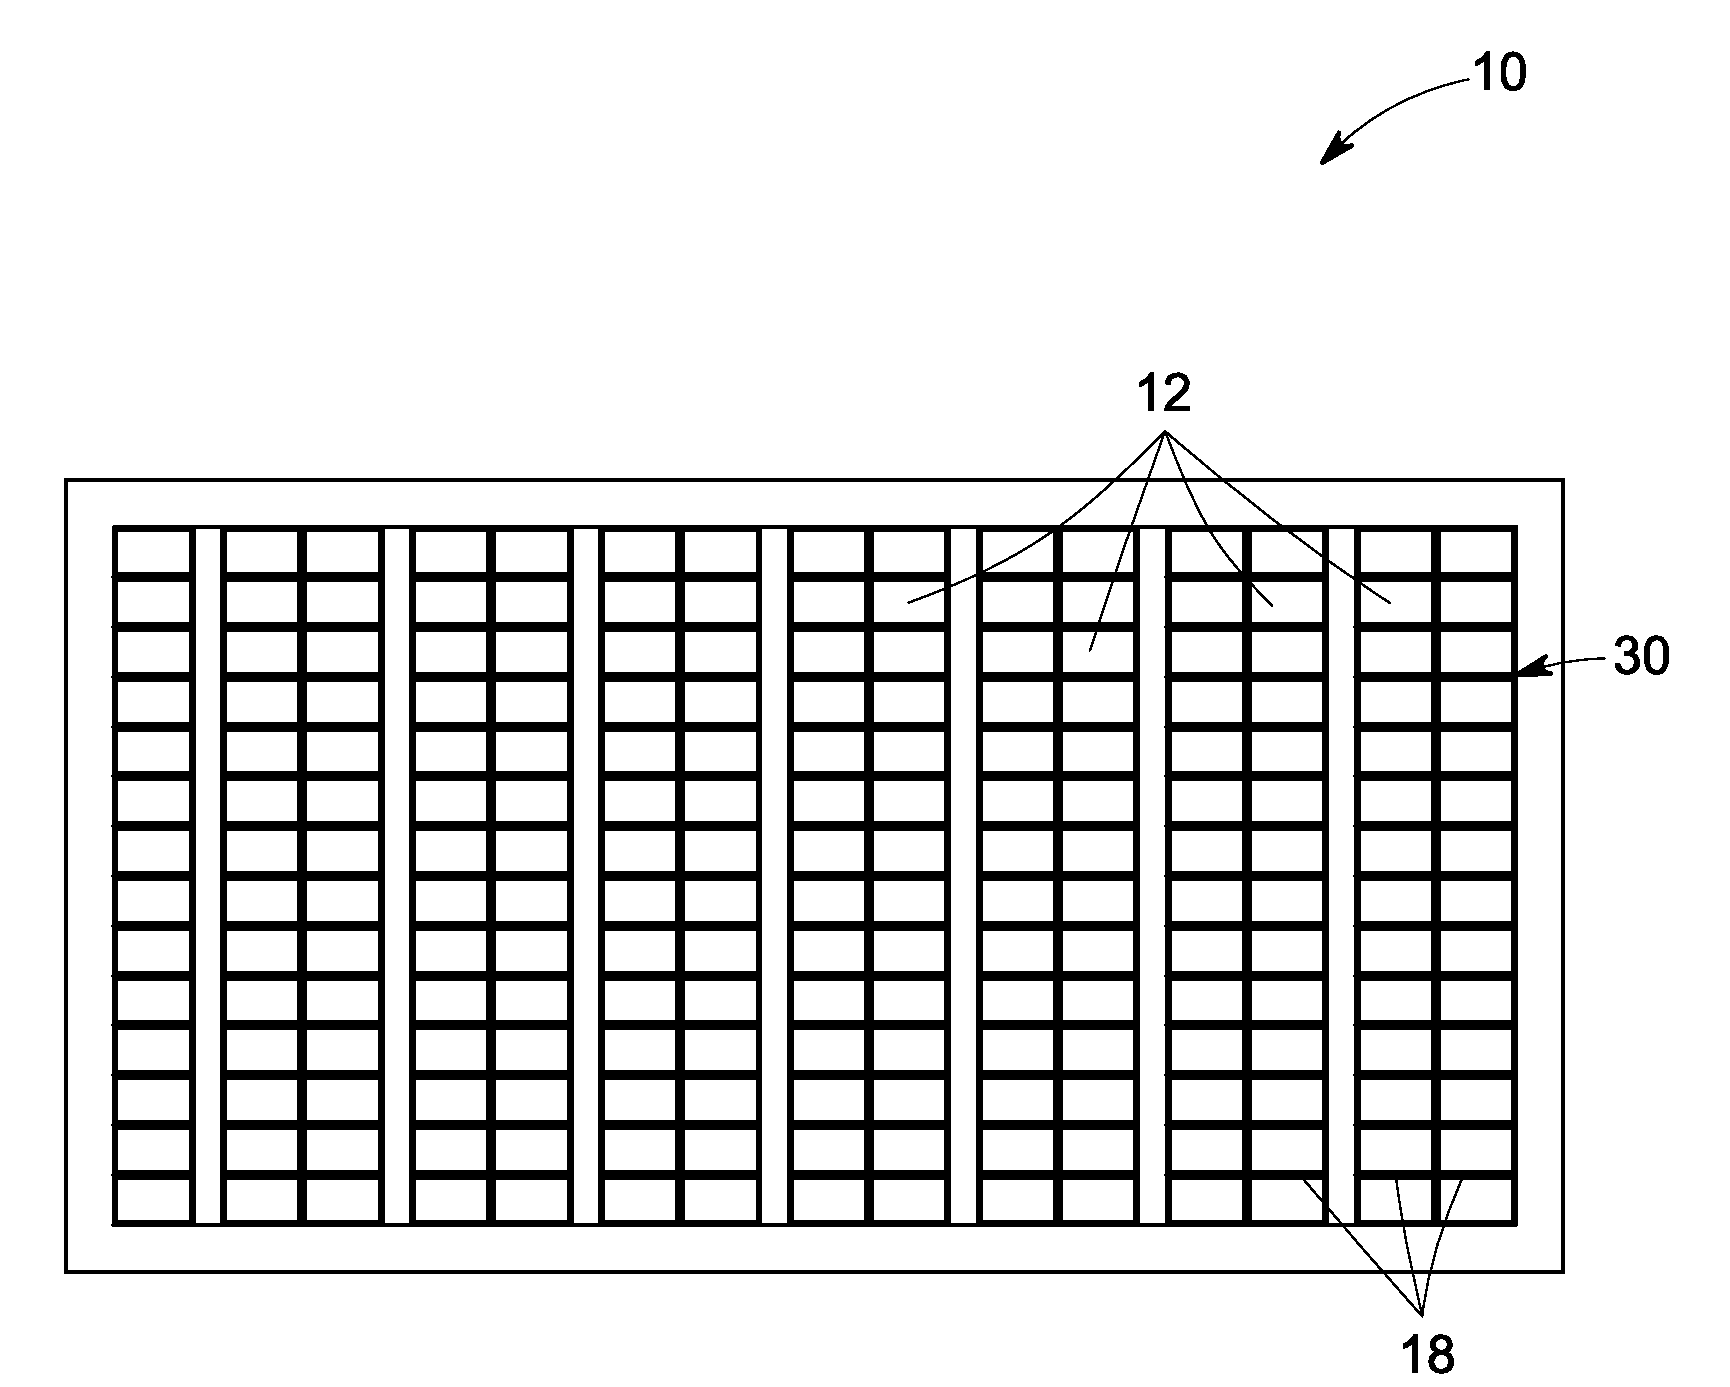 Battery pack assembly and related processes